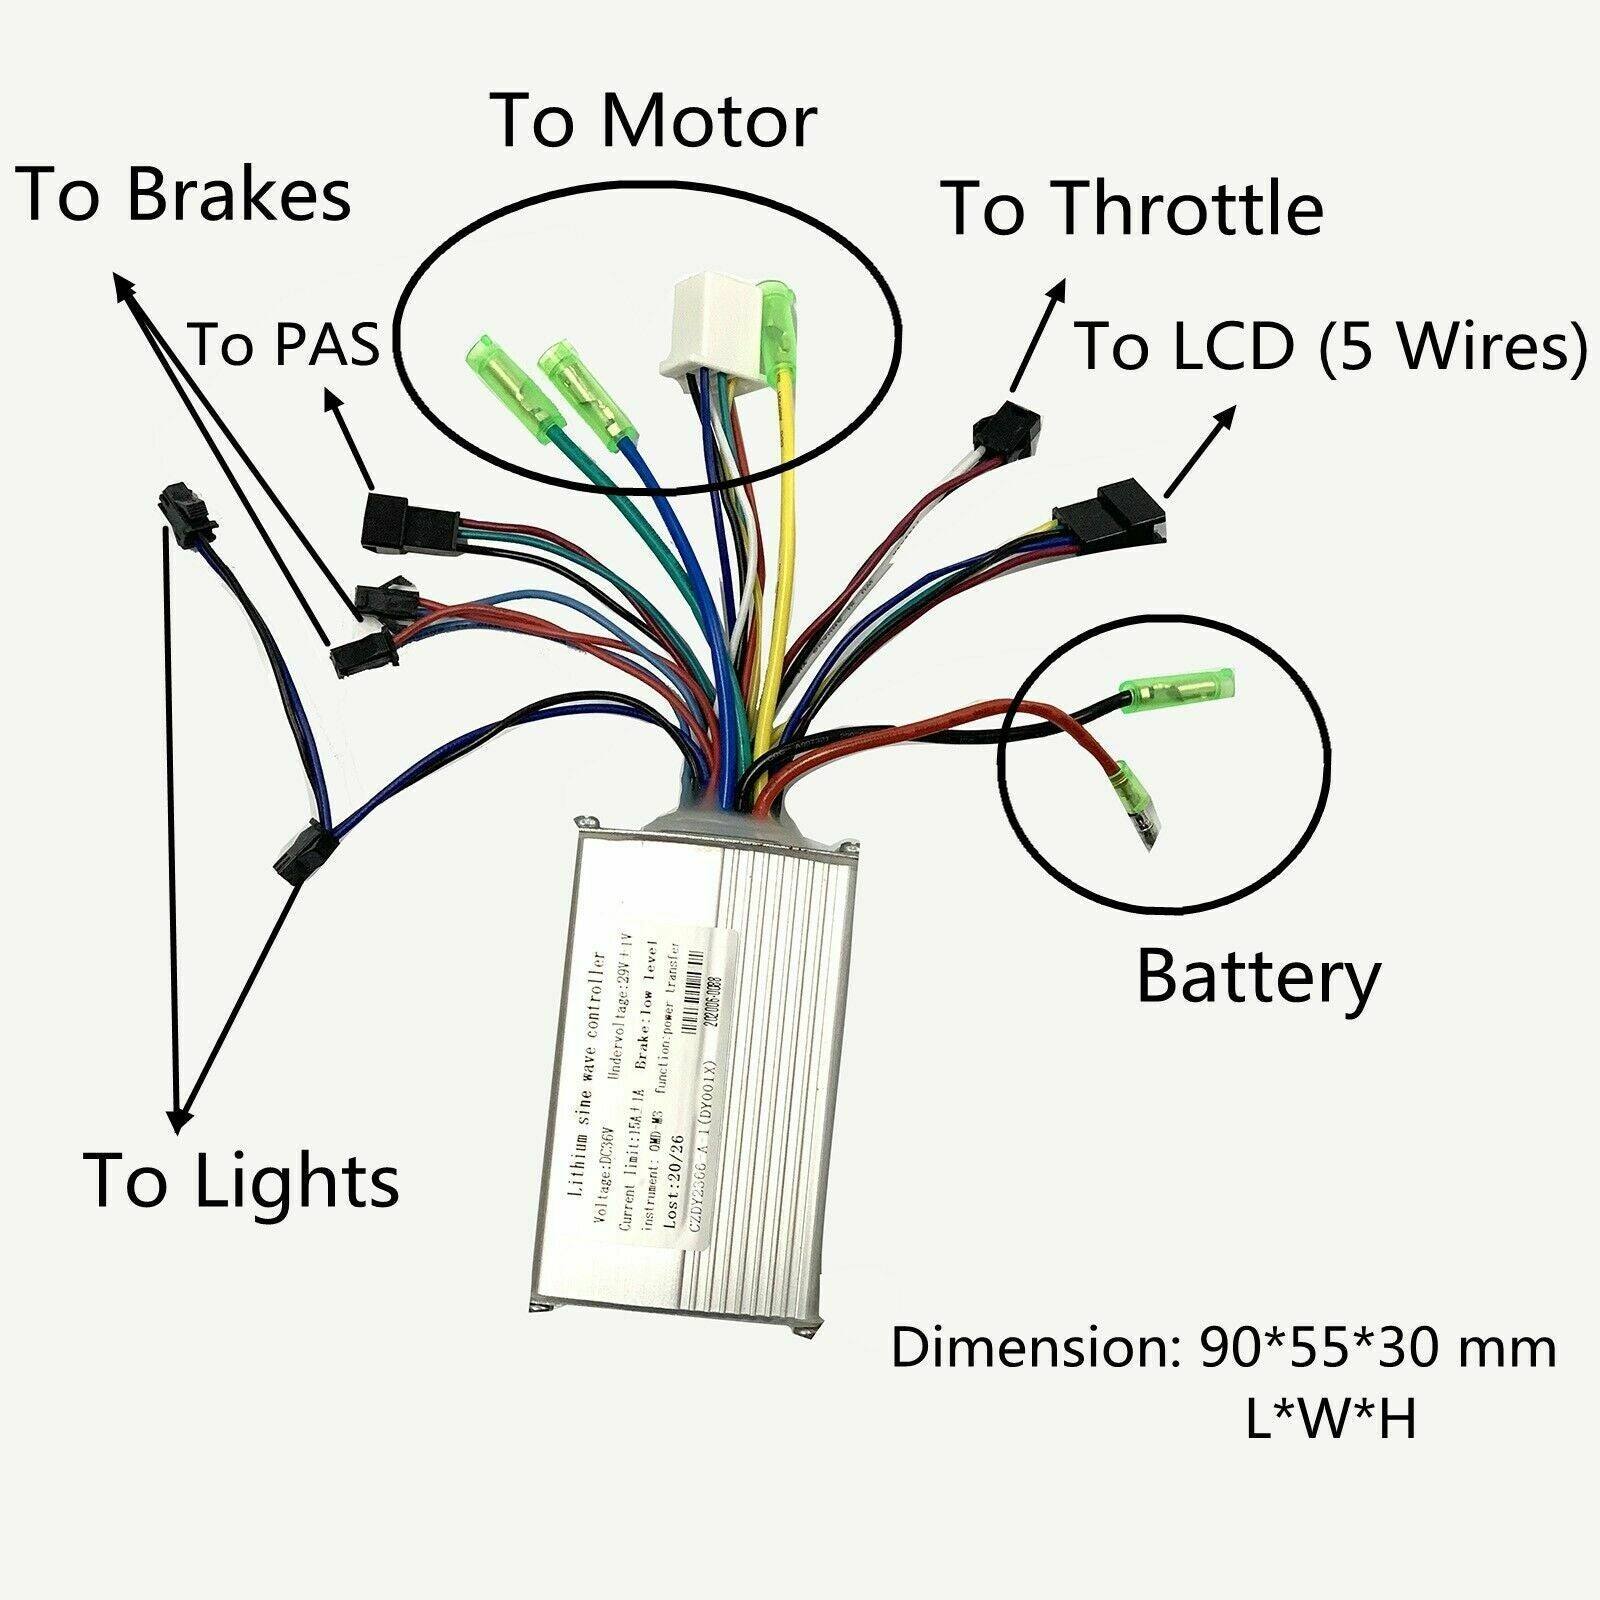 36V 350W 250W Electric Bike Bicycle ScootersBrushless Motor Controller Box - TDRMOTO